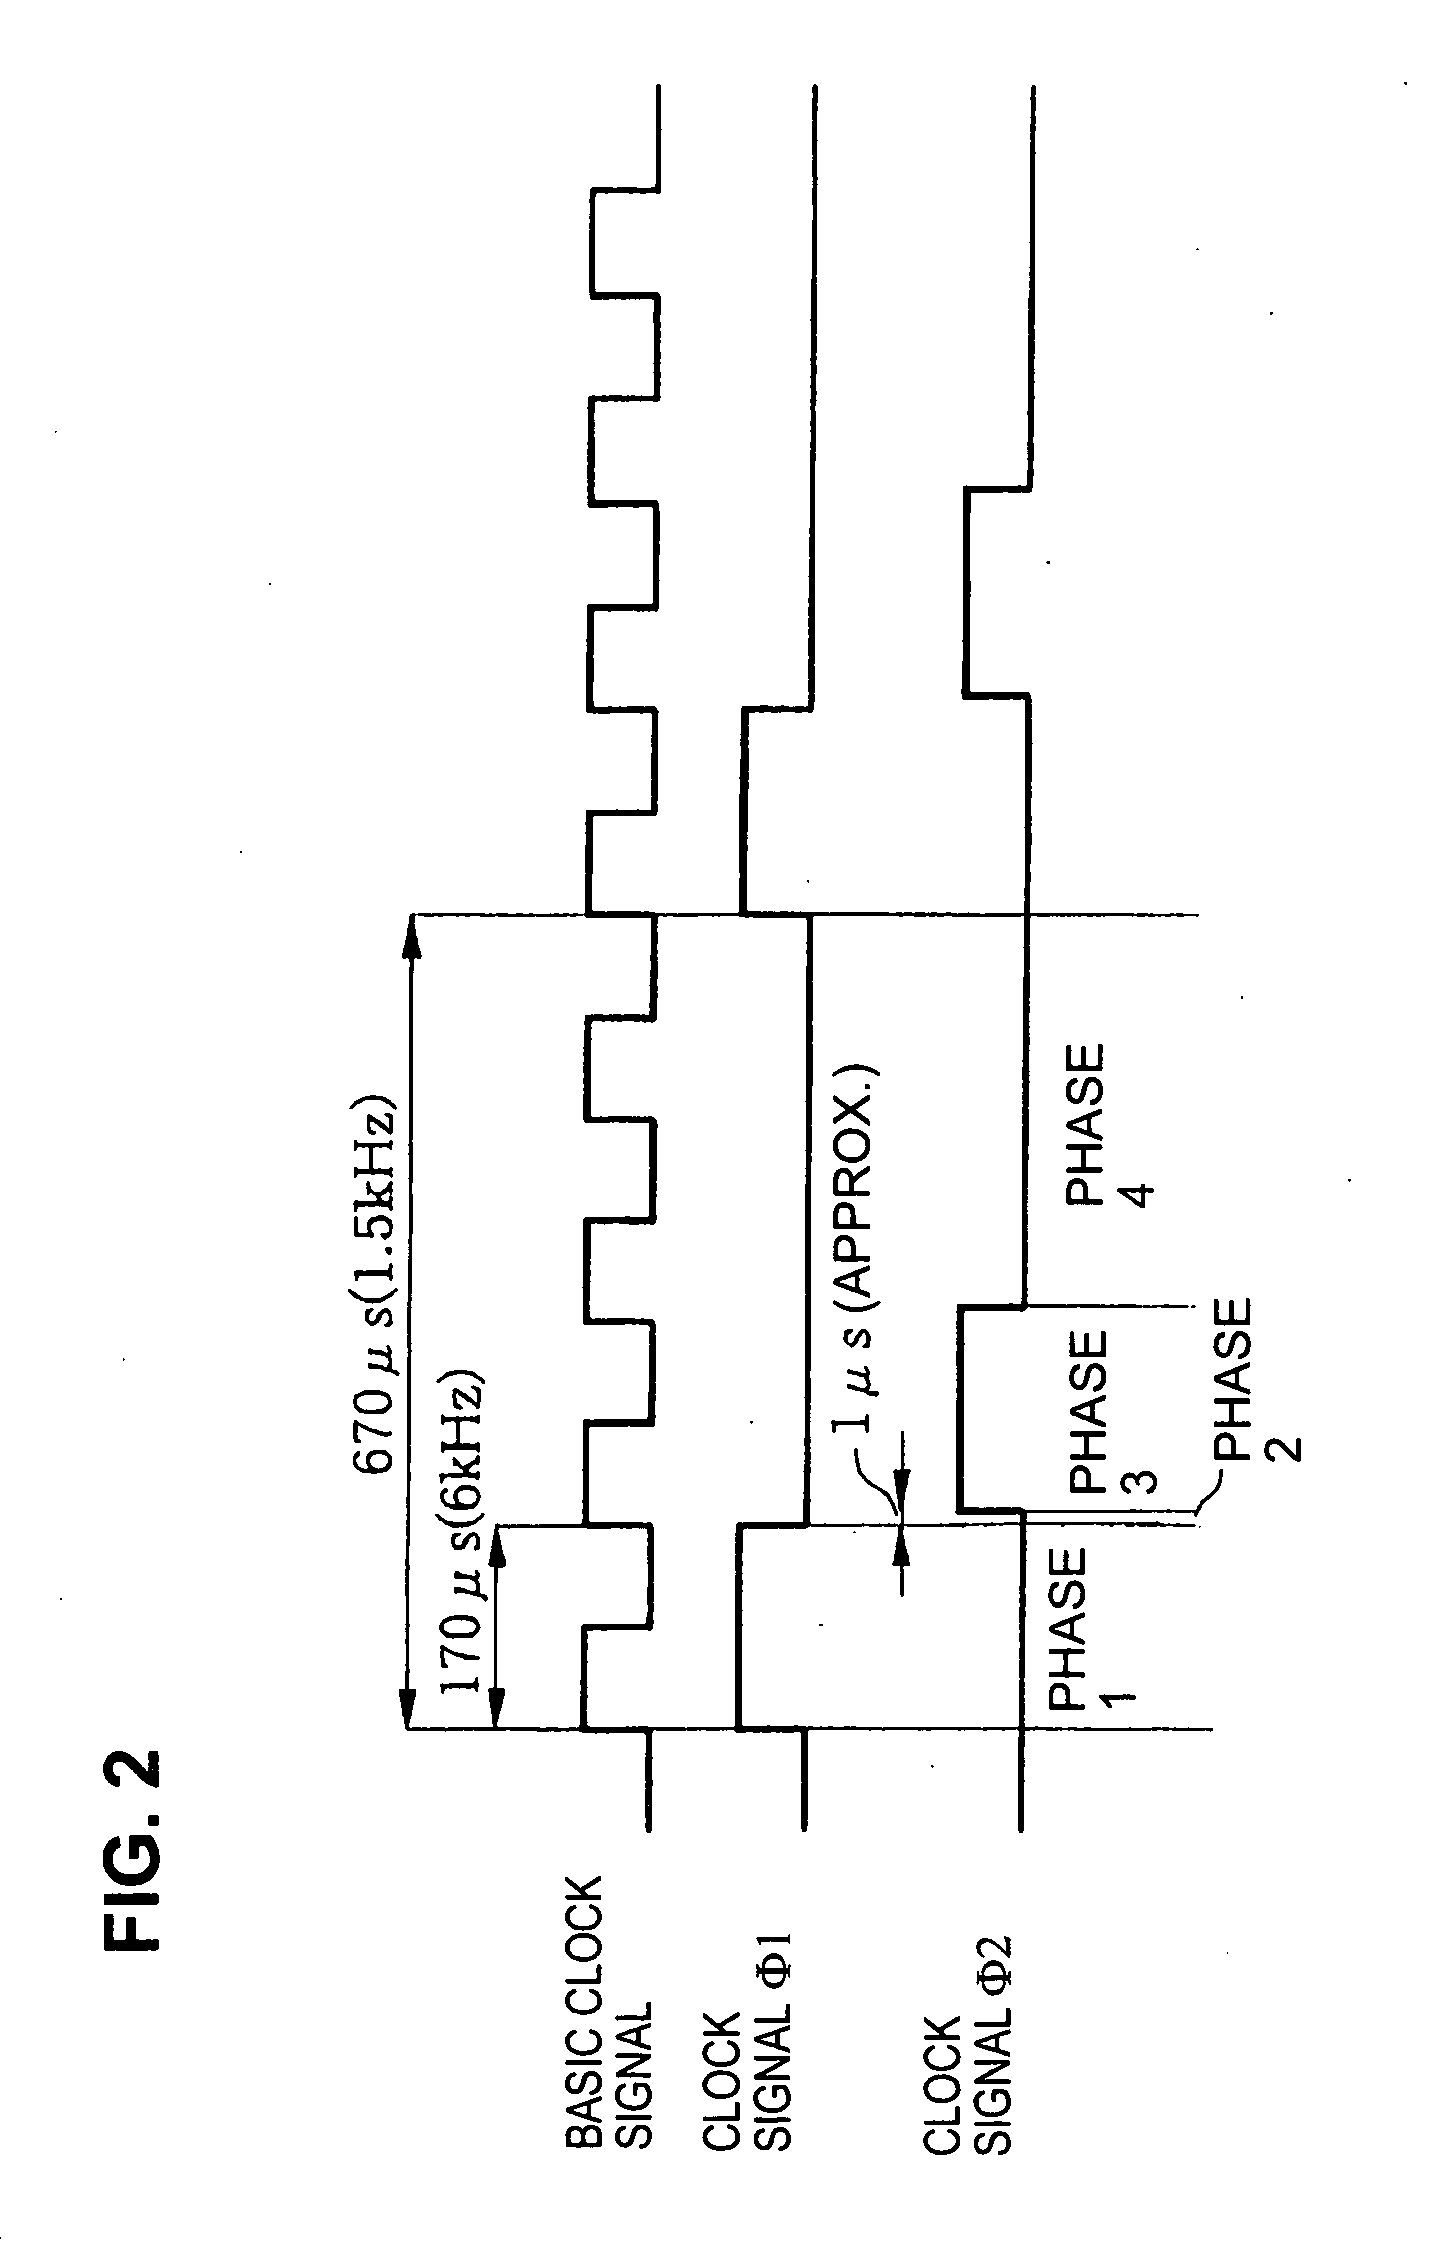 Switched-capacitor low-pass filter and semiconductor pressure sensor apparatus incorporating the filter